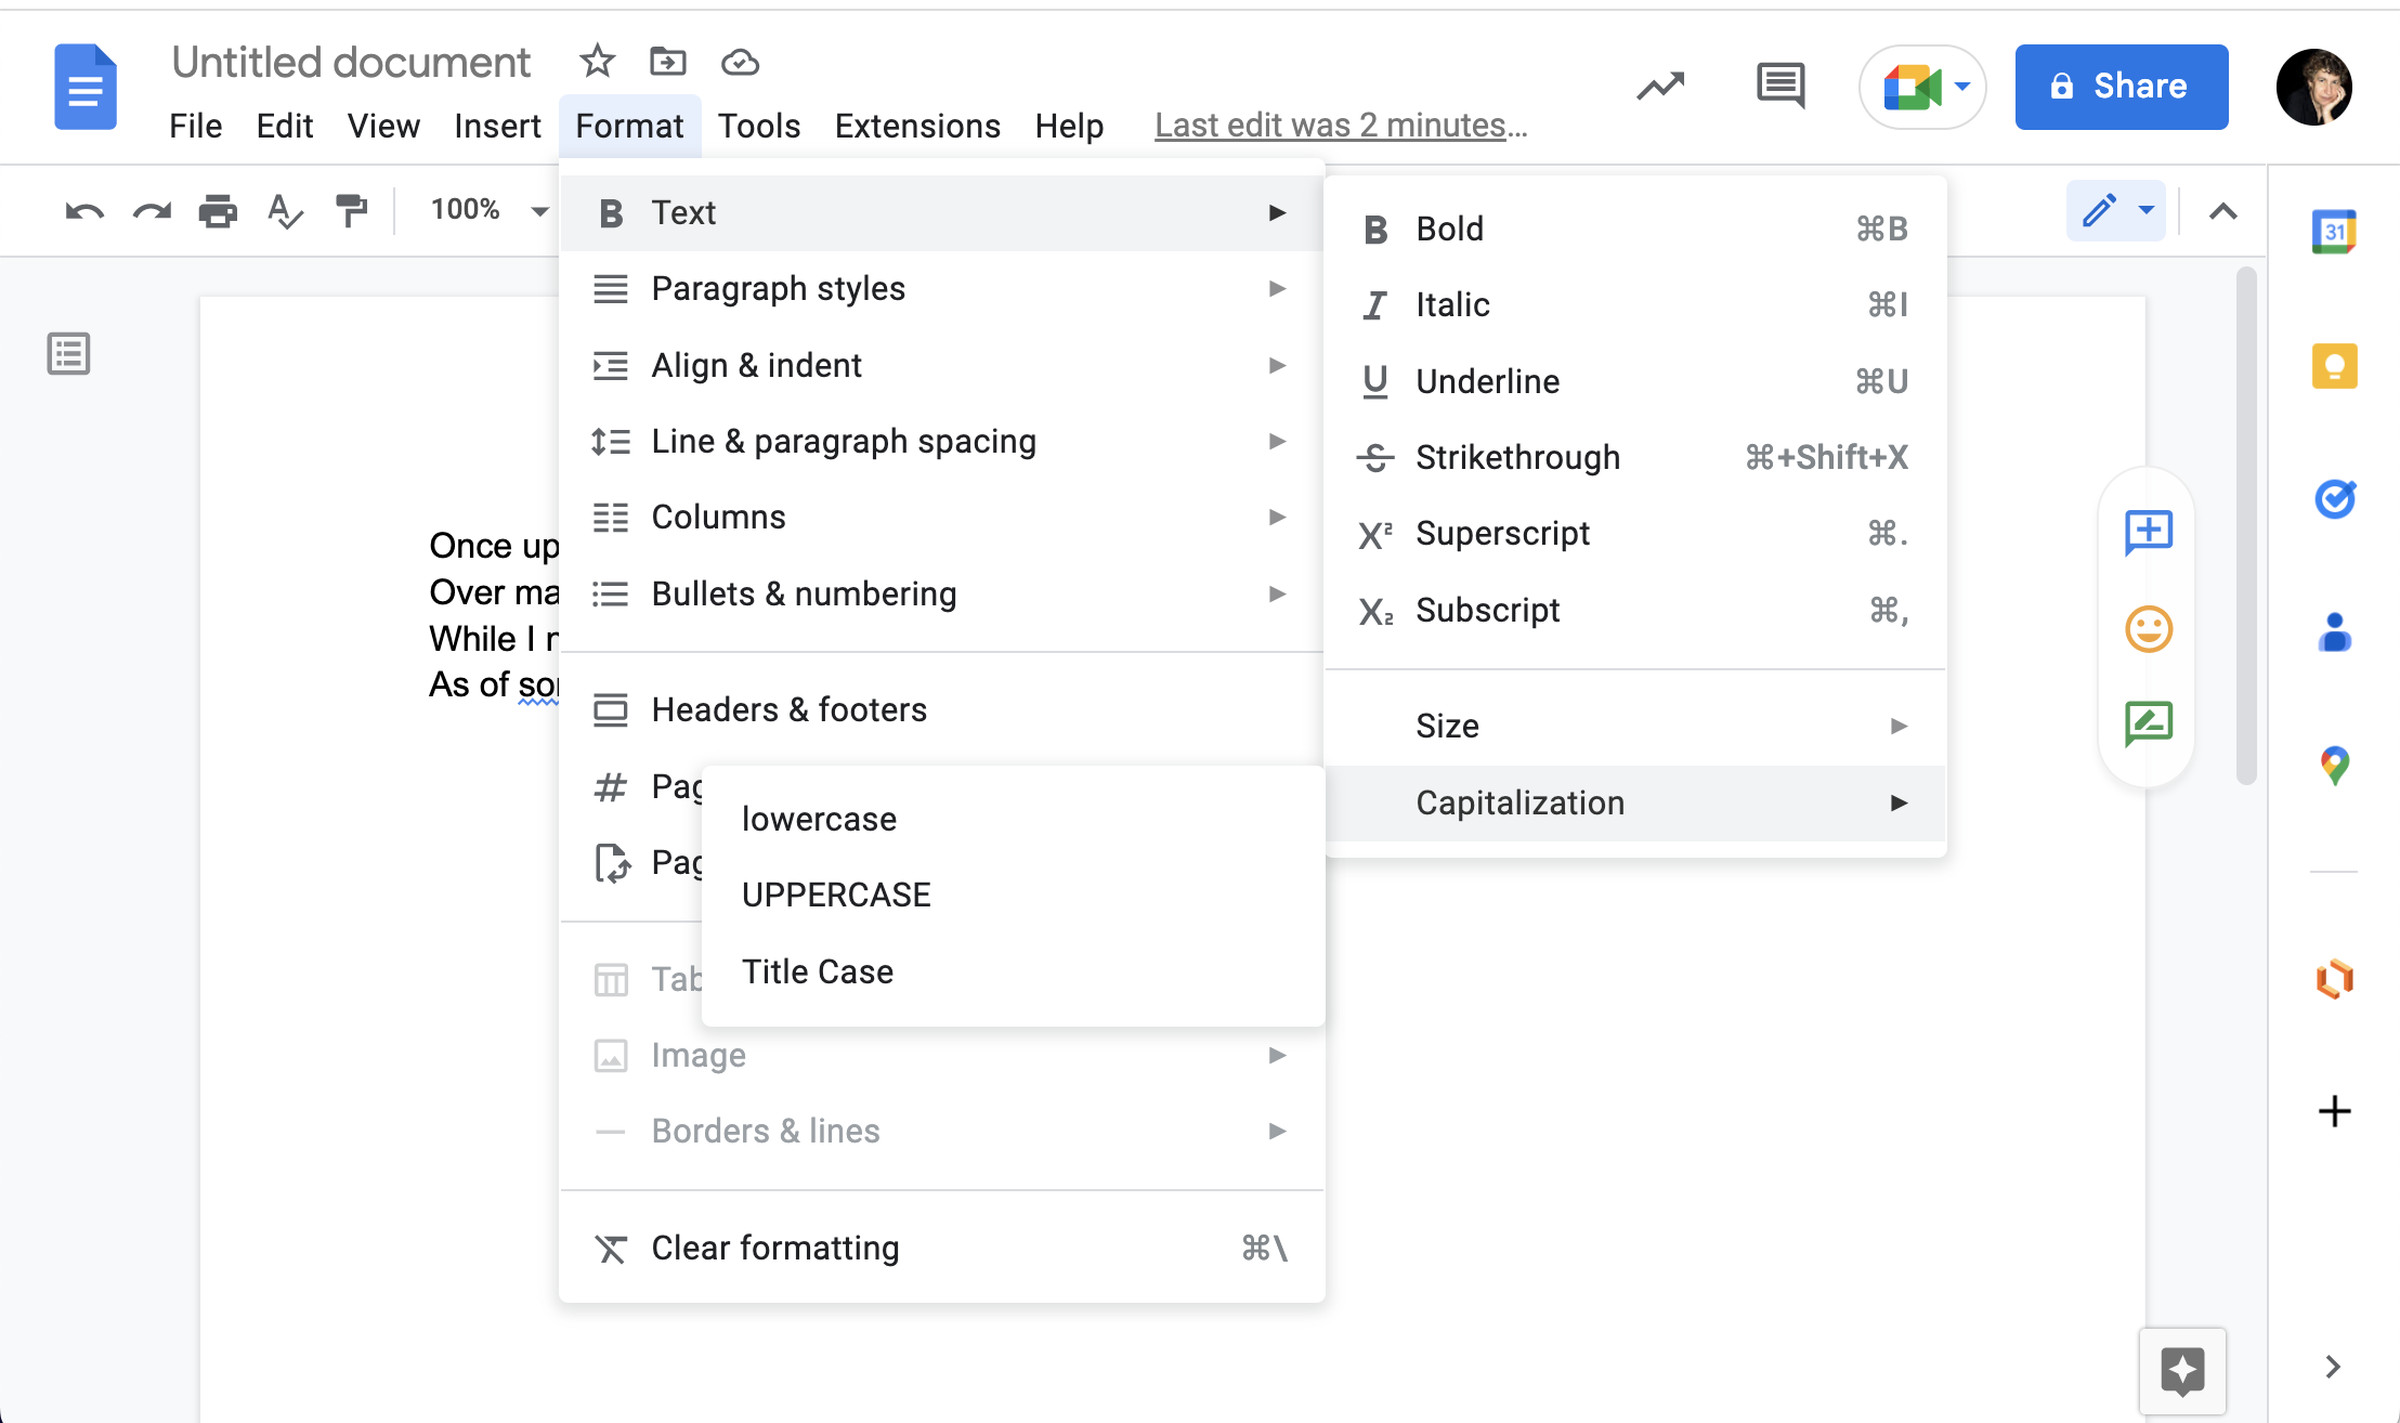 Google Docs page with drop-down menus showing a variety a text formatting options.